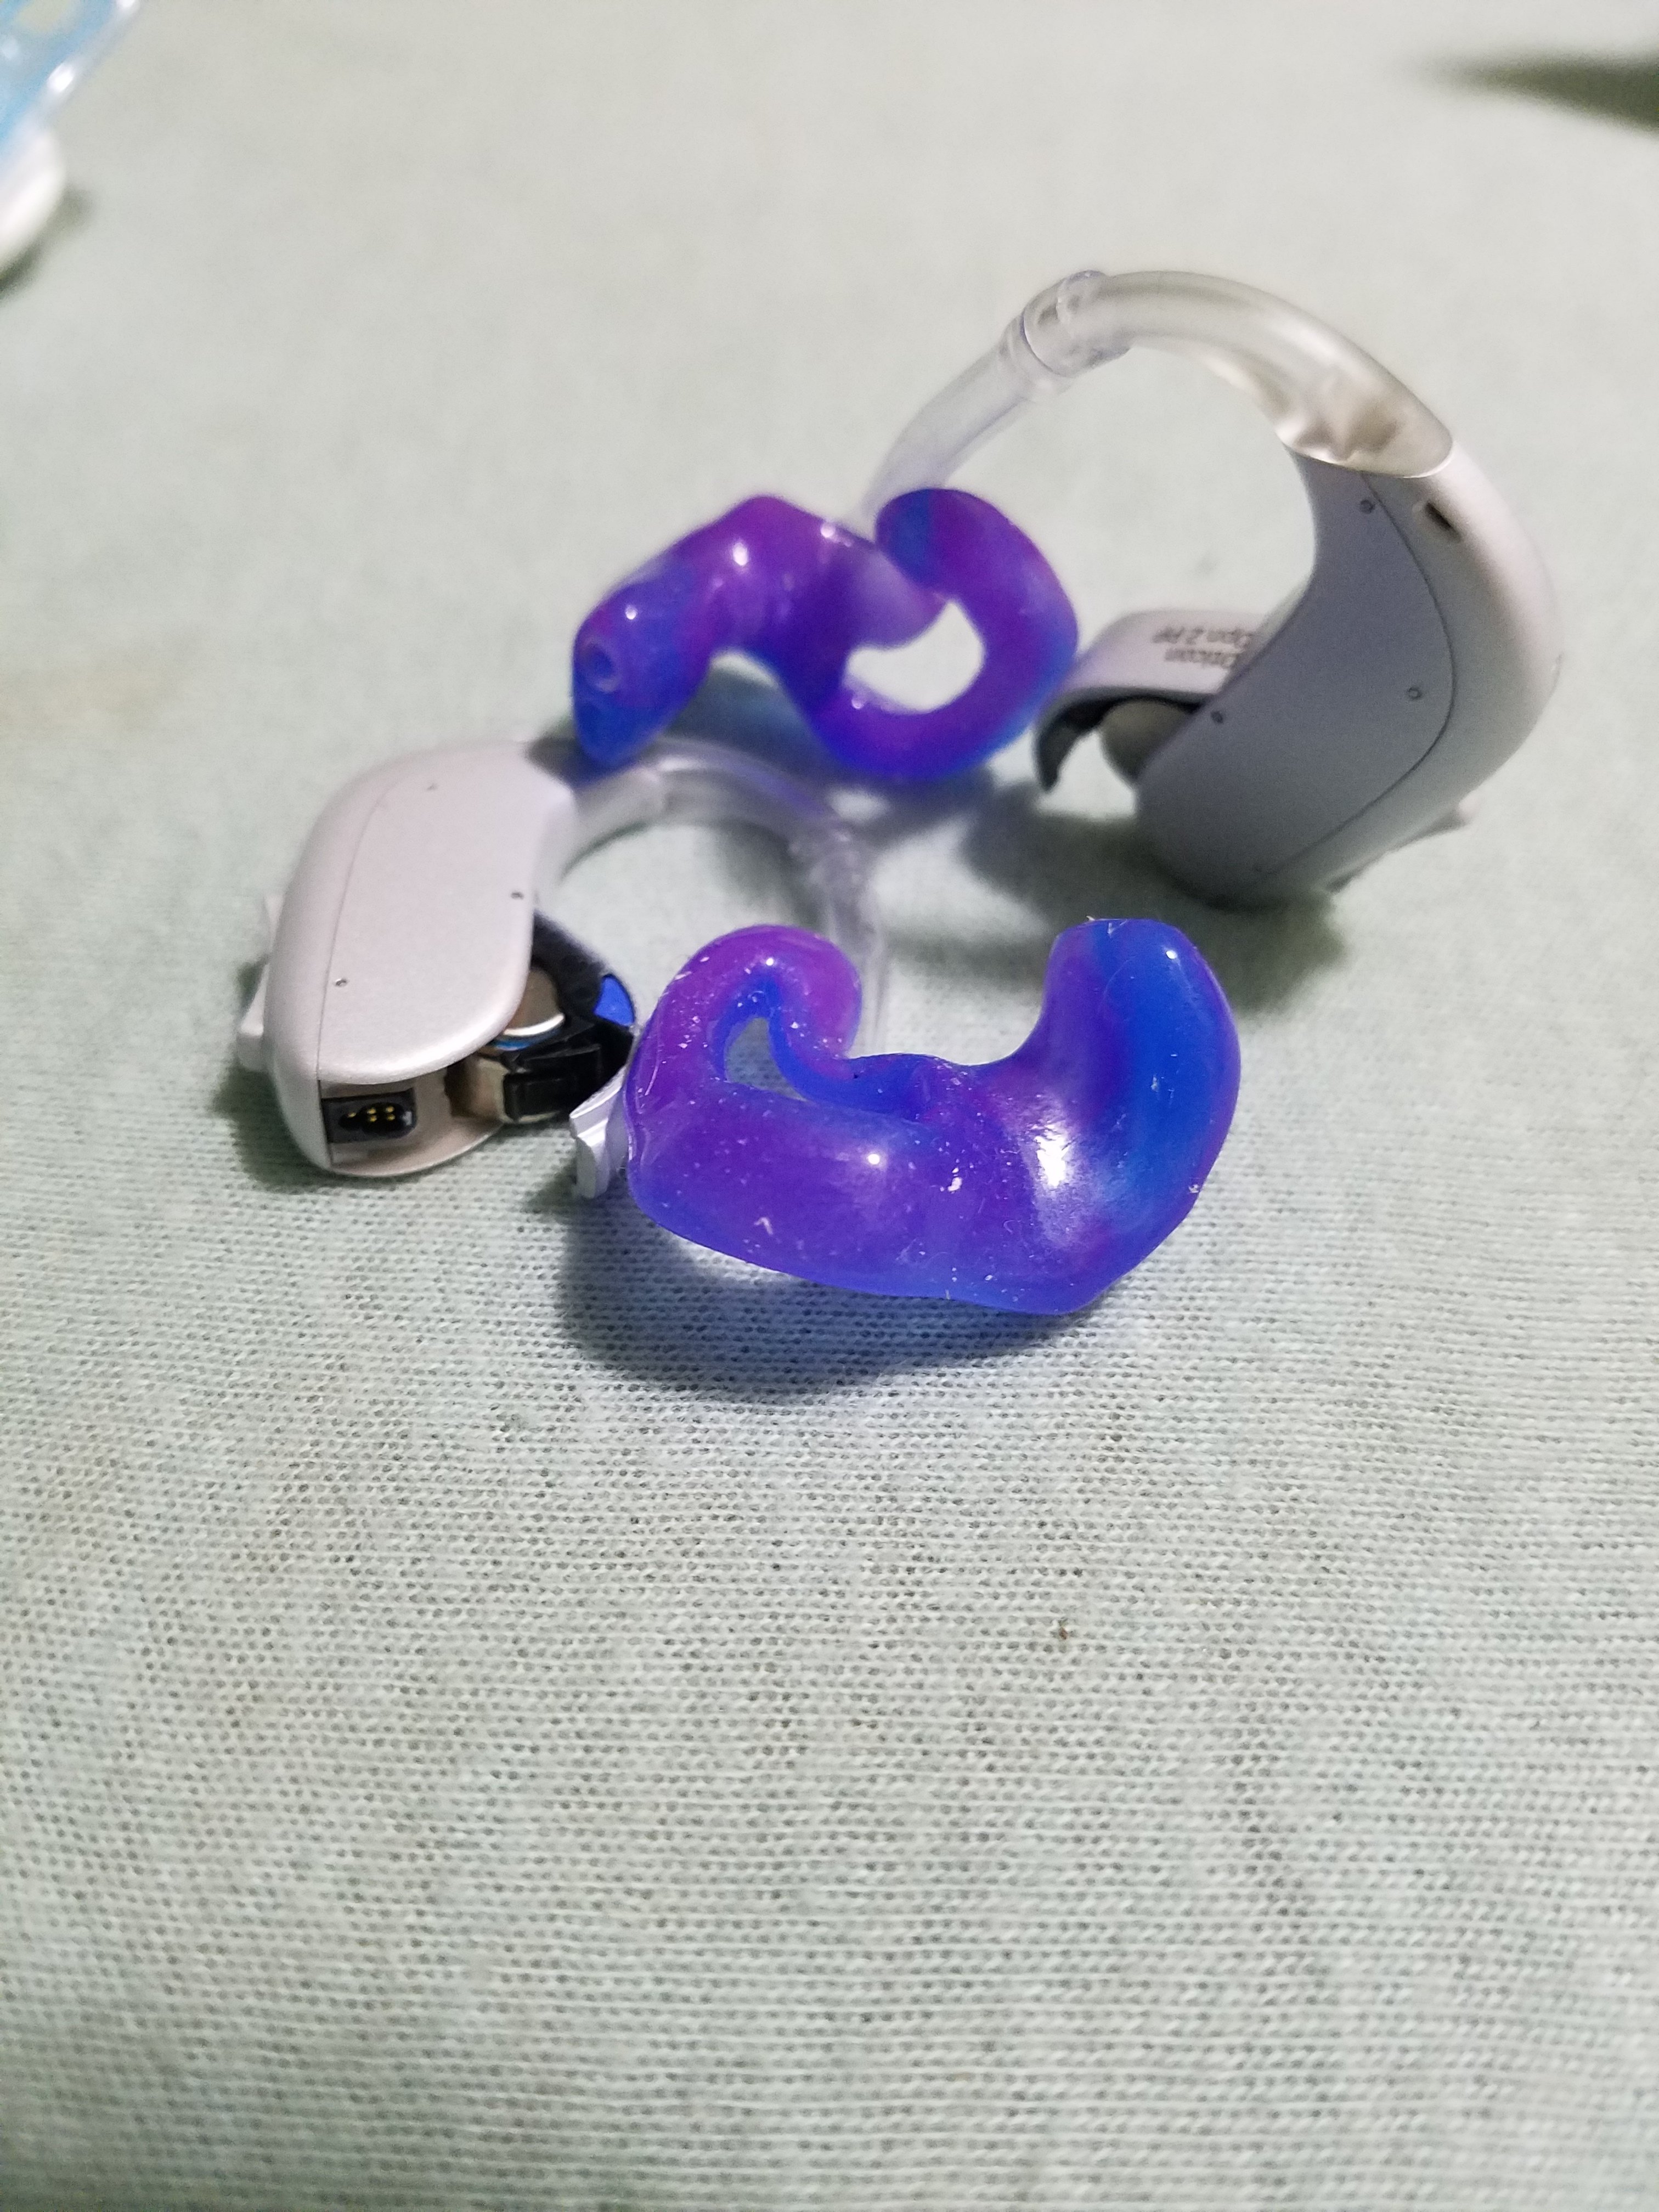 New hearing aids